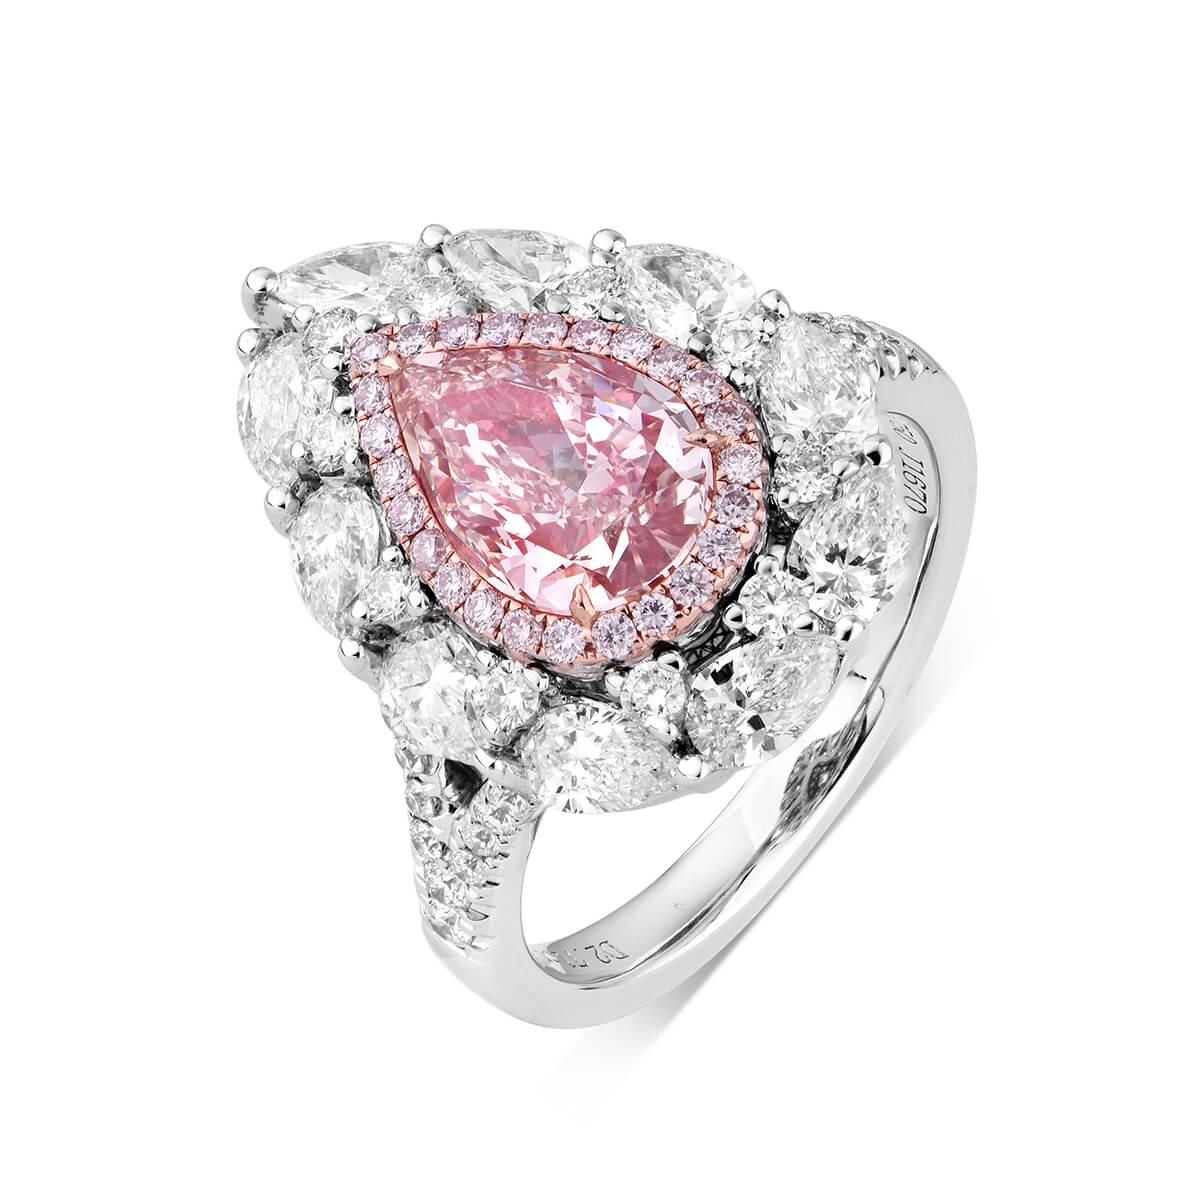 WHITE GOLD PEAR CUT FANCY PINK DIAMOND WITH WHITE DIAMONDS RING - 3.41 CT


Set in 18K white gold


Total fancy pink diamond weight: 1.53 ct
[ 1 diamond ]
Color: Fancy brownish pink
Clarity: VS2

Total white diamond weight: 1.74 ct
[ 44 diamonds